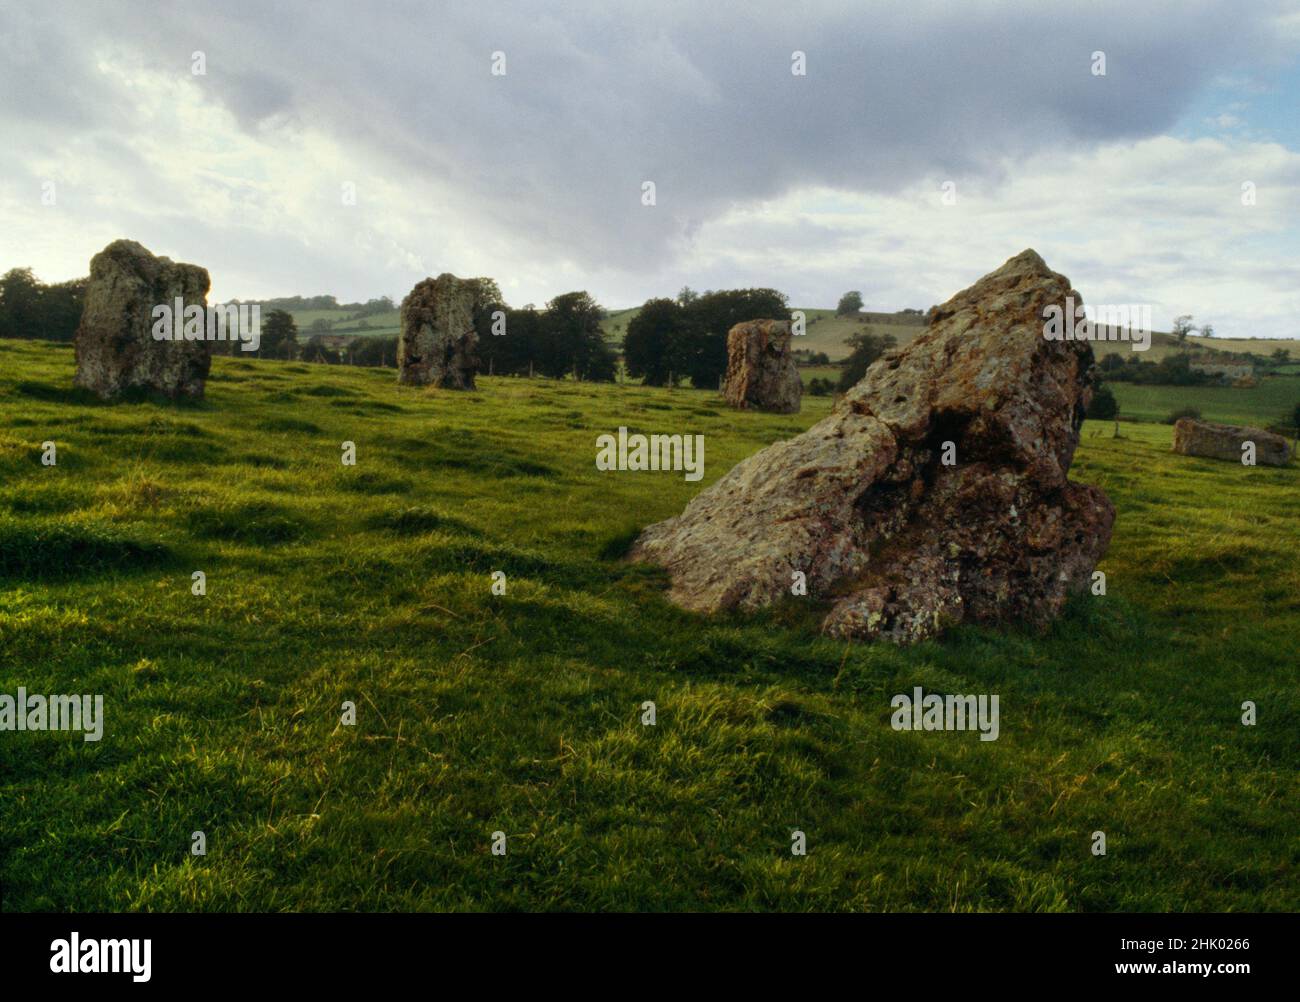 View NW at five stones of the NE Circle of the Neolithic ceremonial complex of circles & avenues at Stanton Drew, Bath and NE Somerset, England, UK. Stock Photo